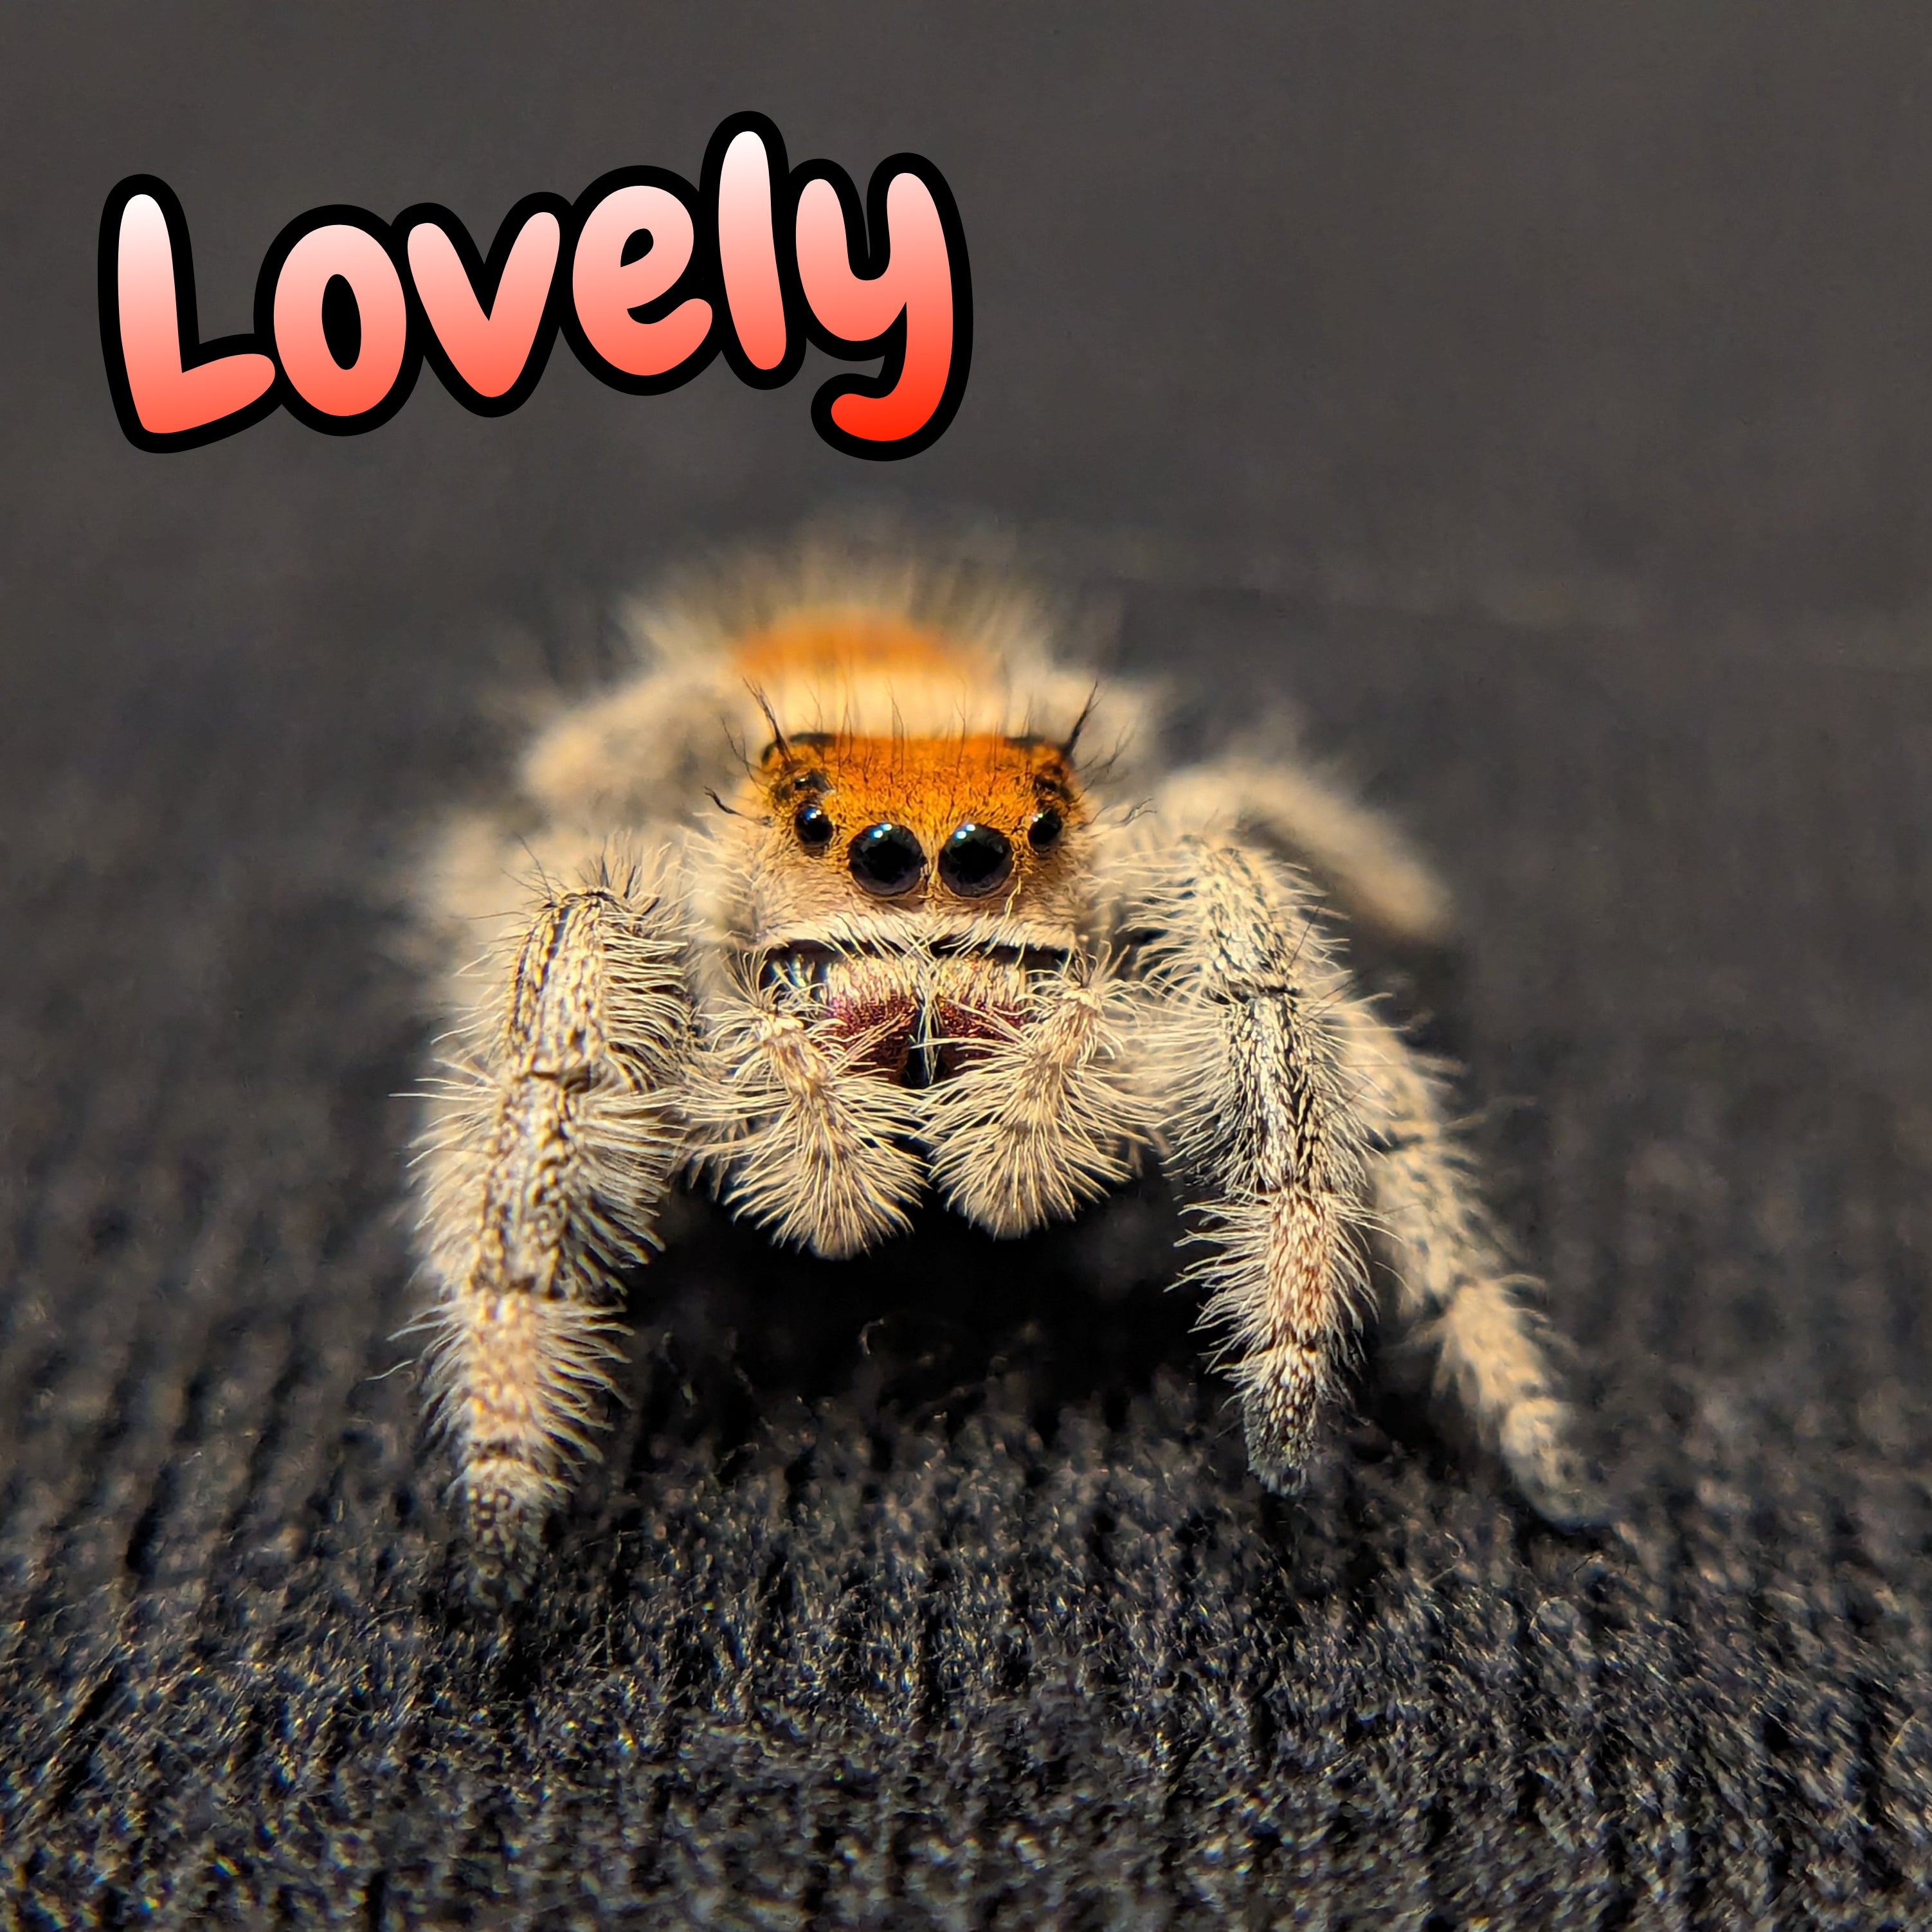 Regal Jumping Spider "Lovely"